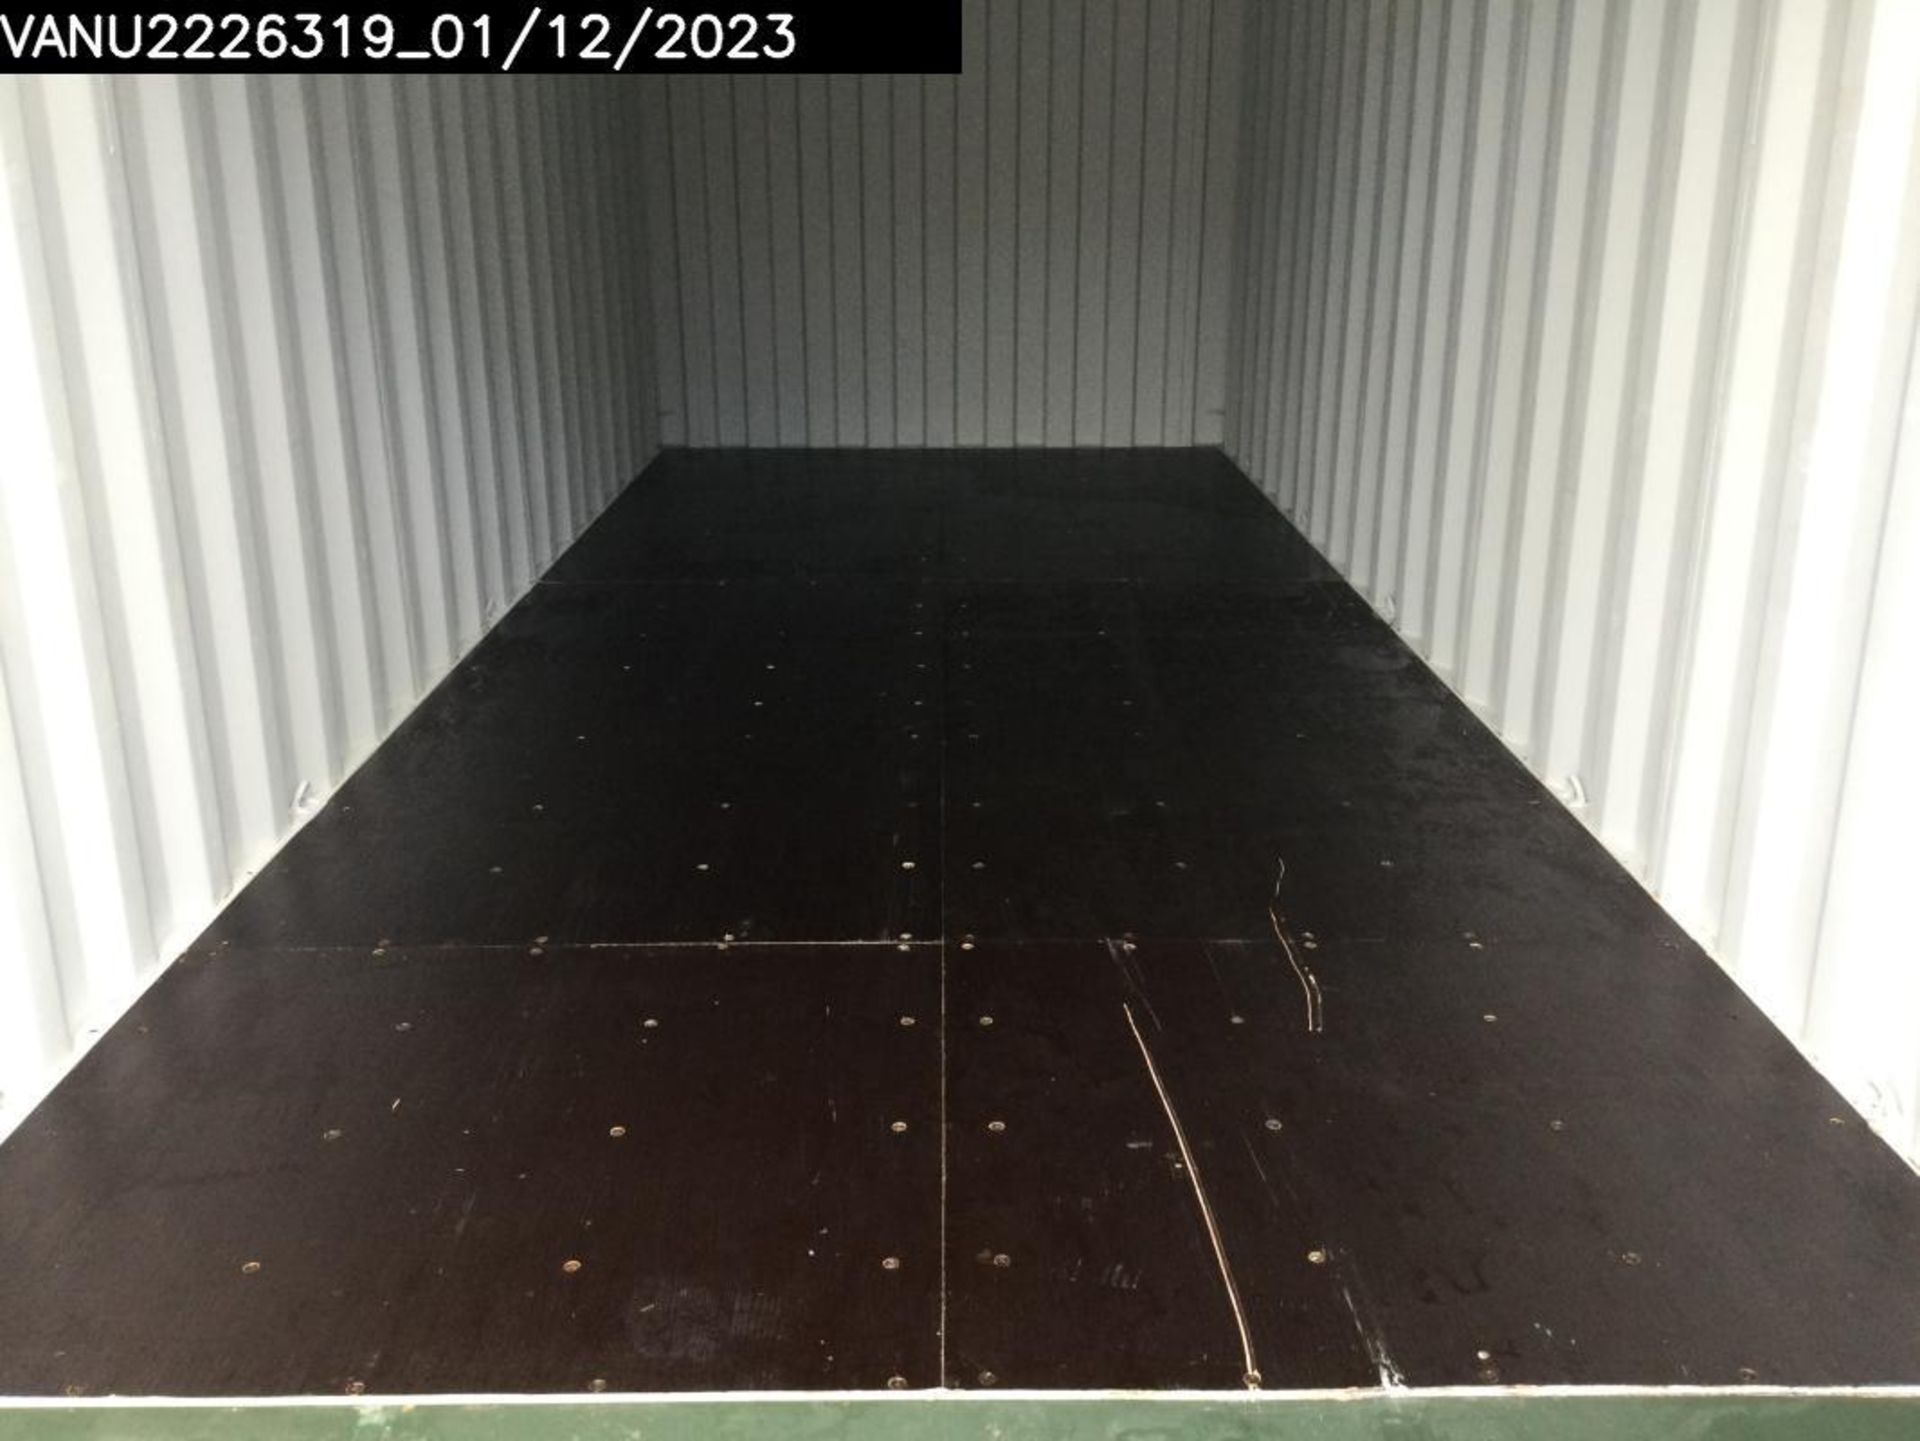 One Trip 20ft Shipping Container - Unit Number – VANU2226319 - Image 8 of 8